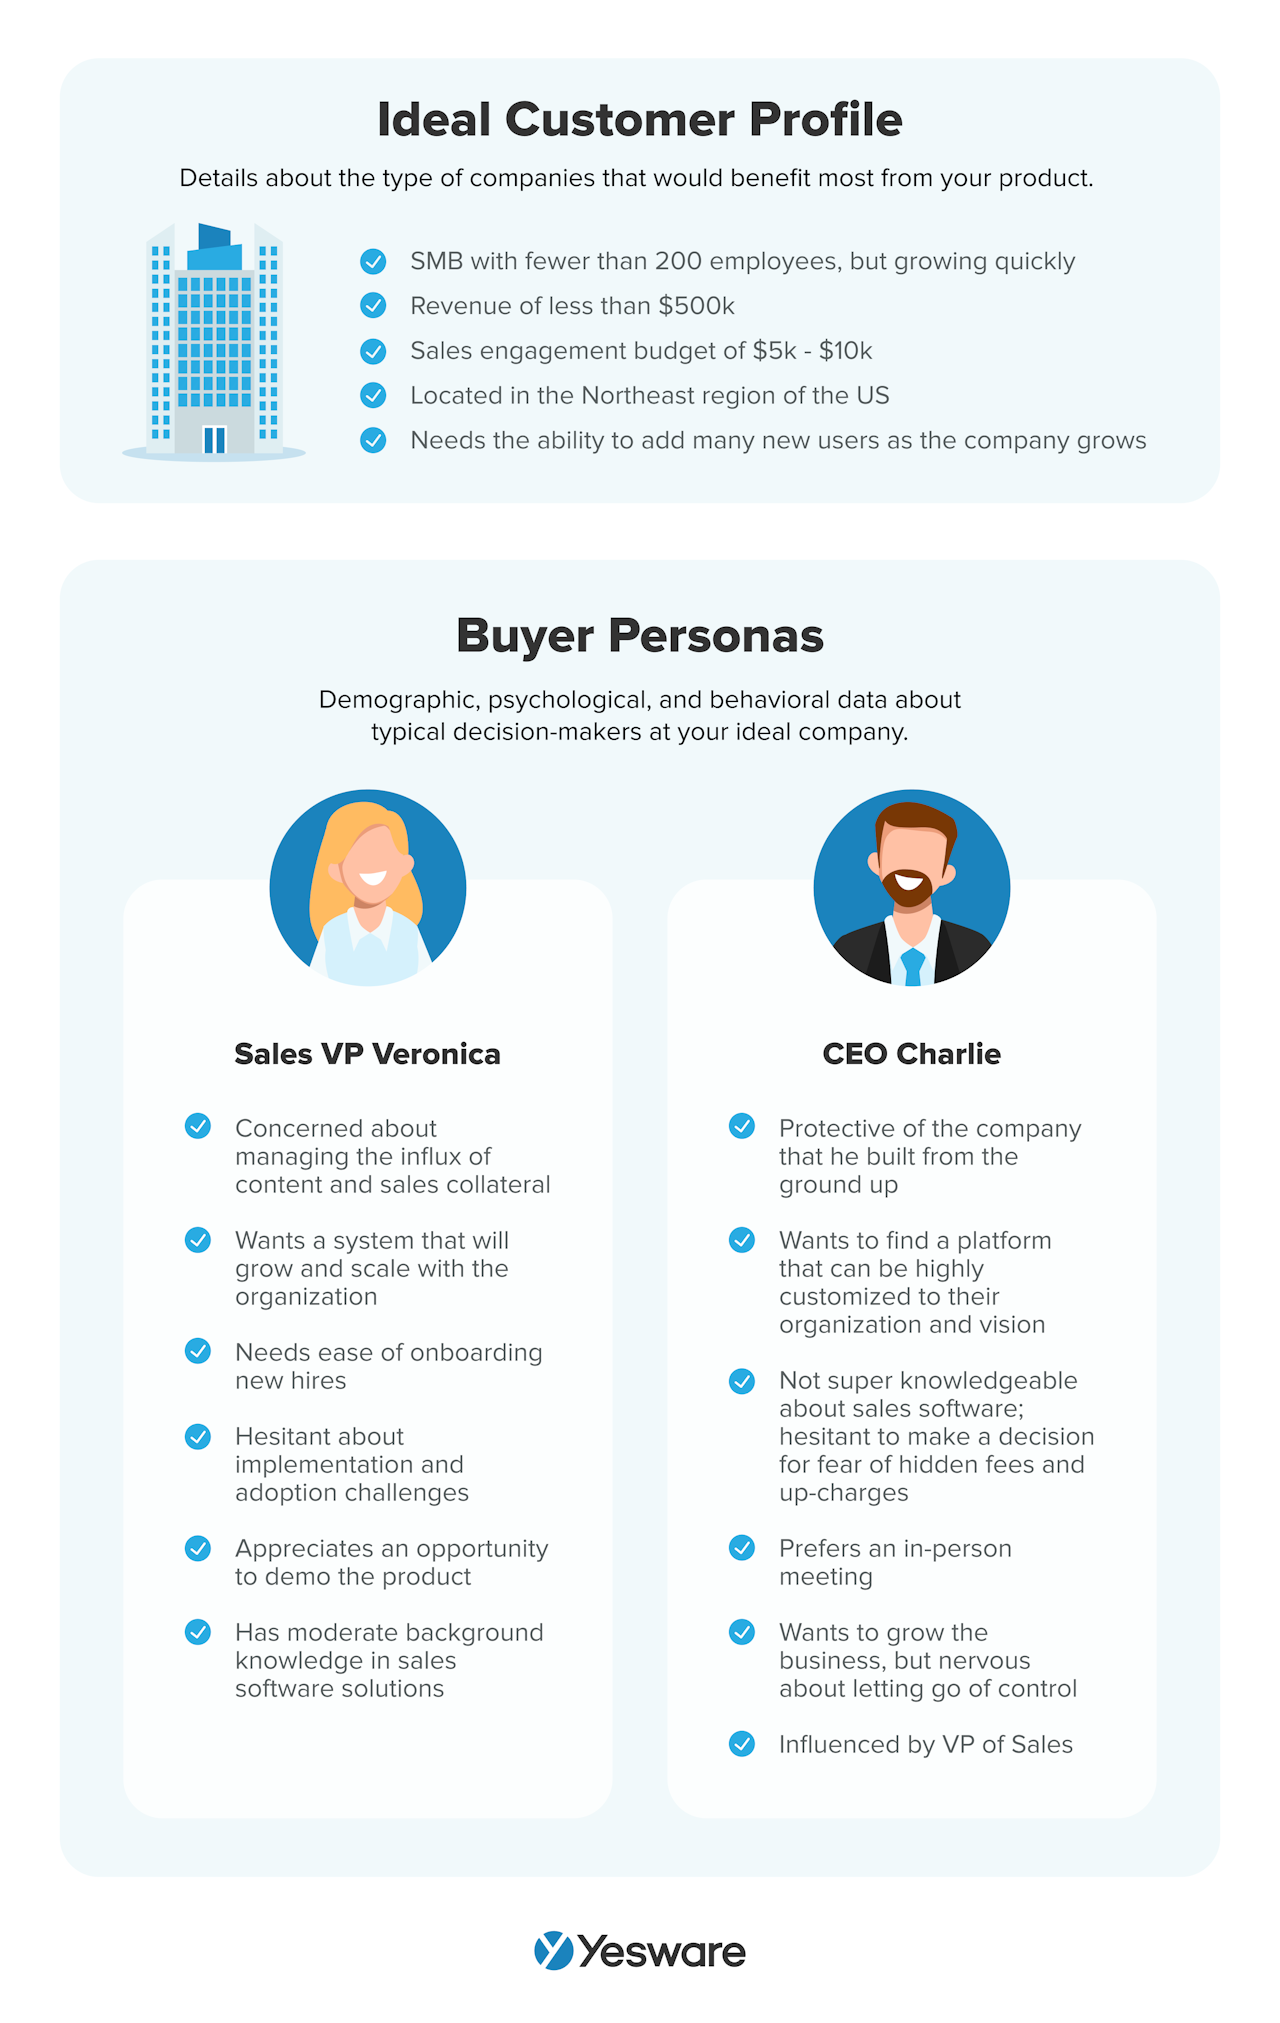 BANT: ideal customer profile and buyer personas